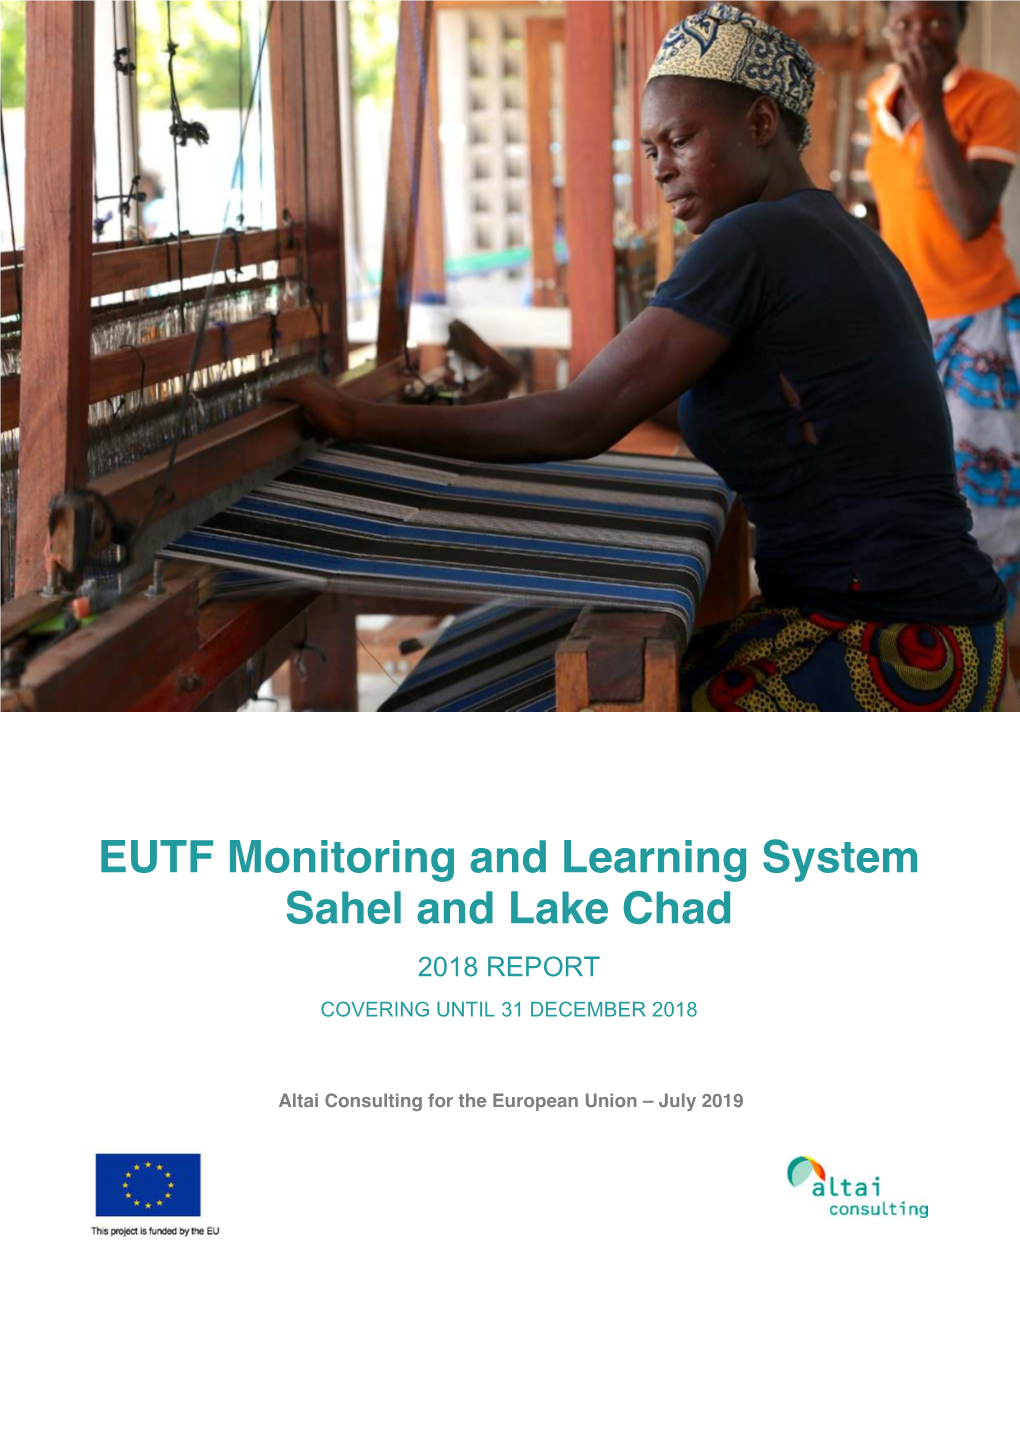 EUTF Monitoring and Learning System Sahel and Lake Chad 2018 REPORT COVERING UNTIL 31 DECEMBER 2018